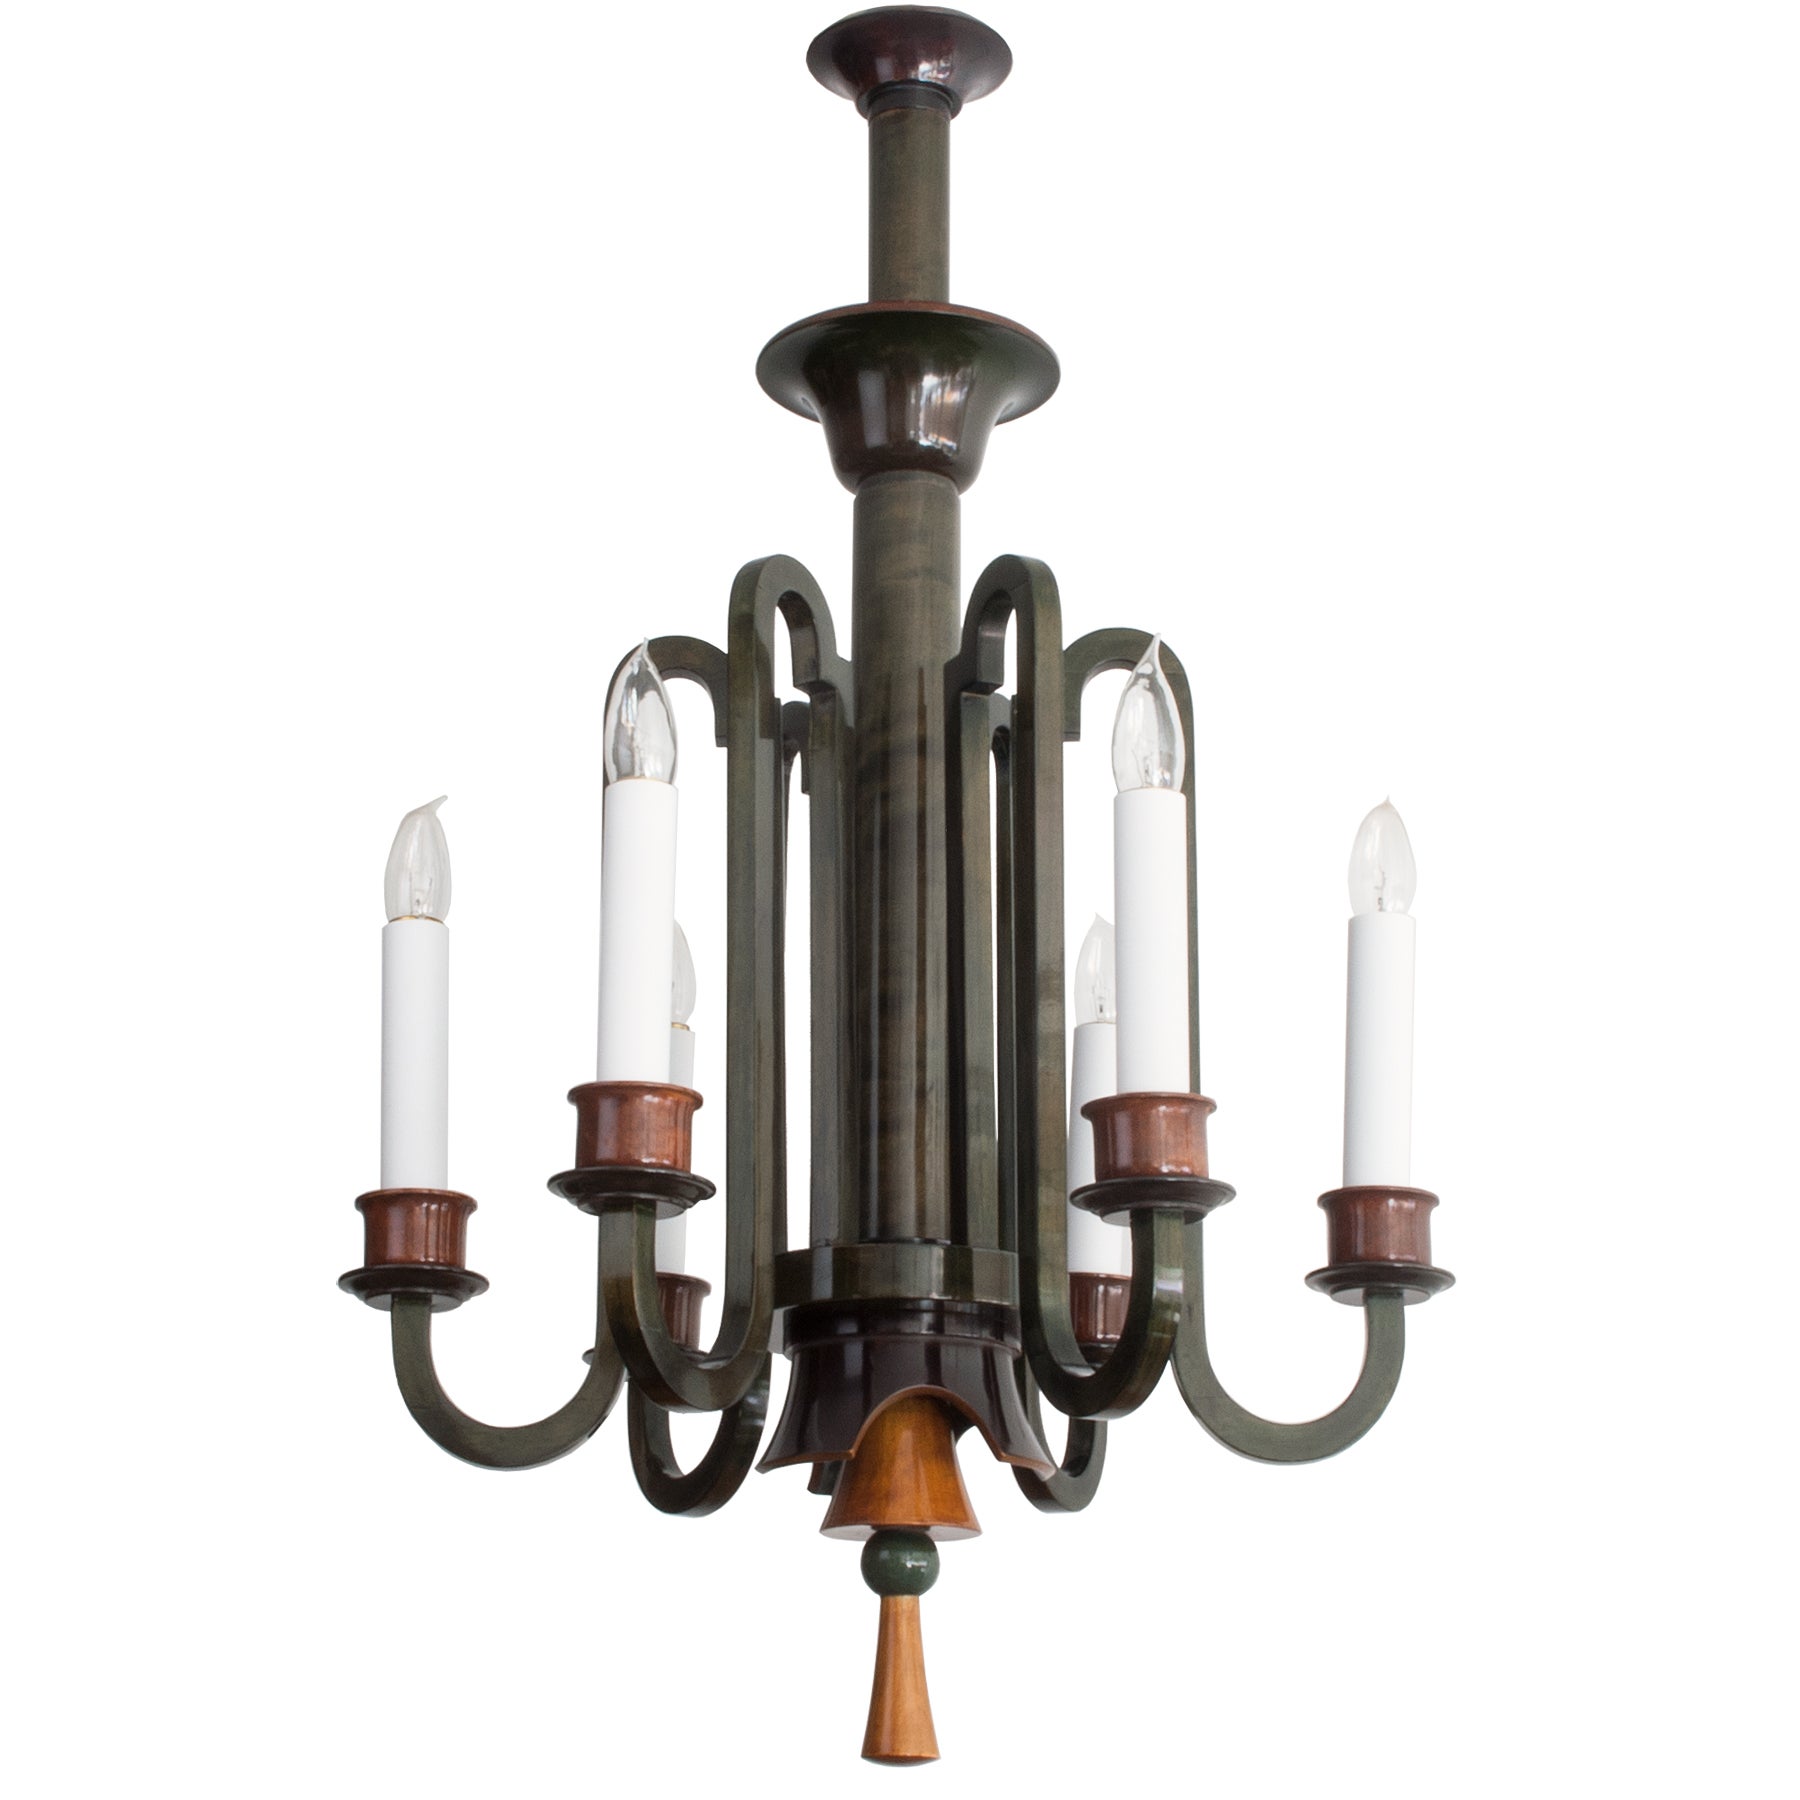 Swedish Art Deco chandelier in stained and polished birch wood.